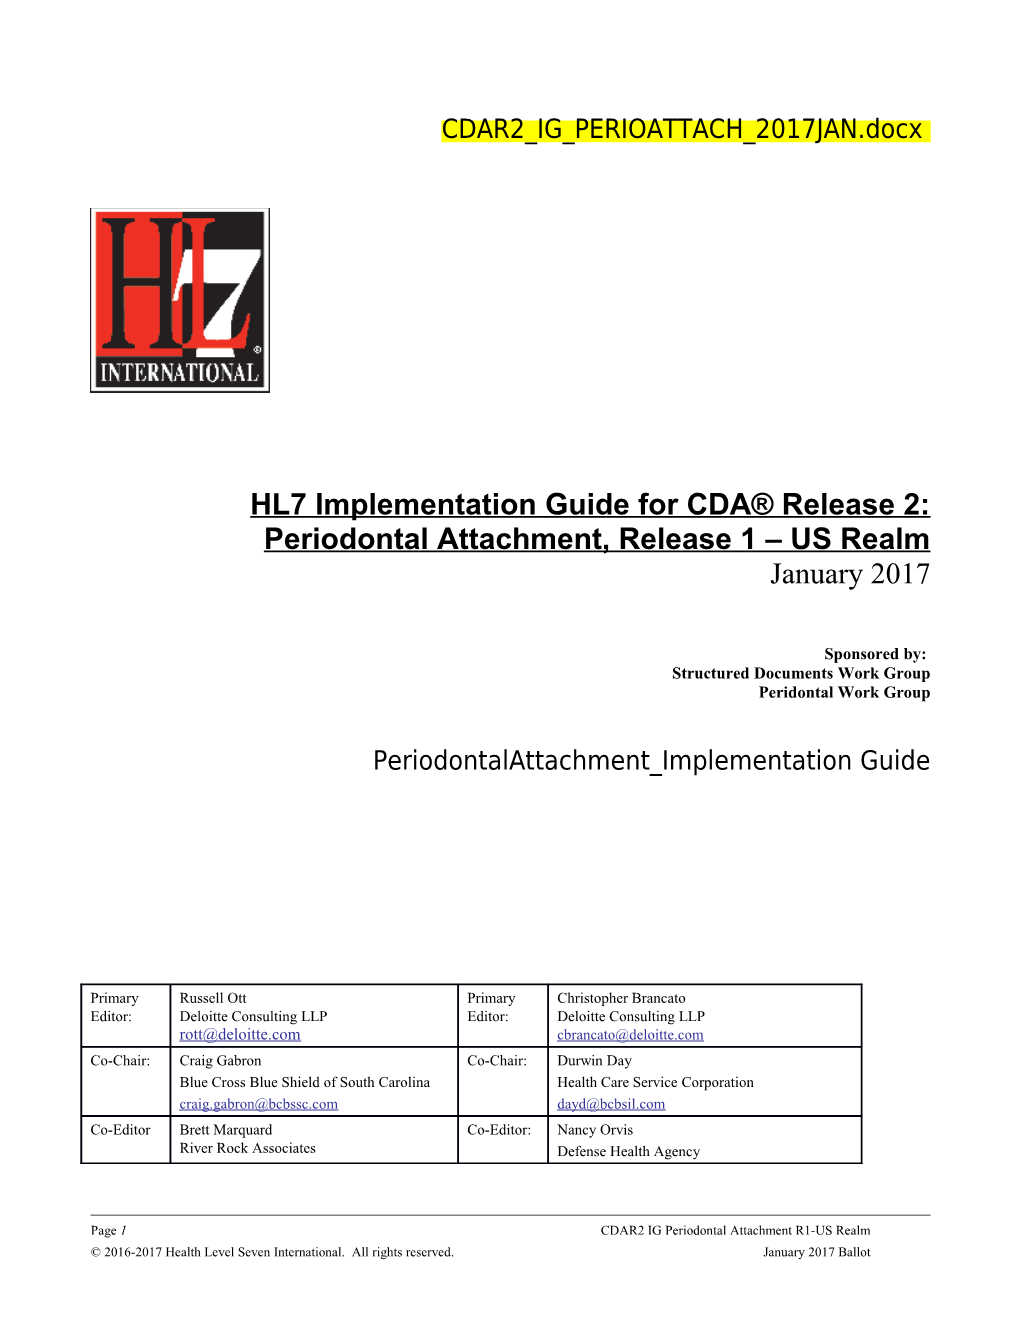 HL7 Implementation Guide for CDA Release 2 s1